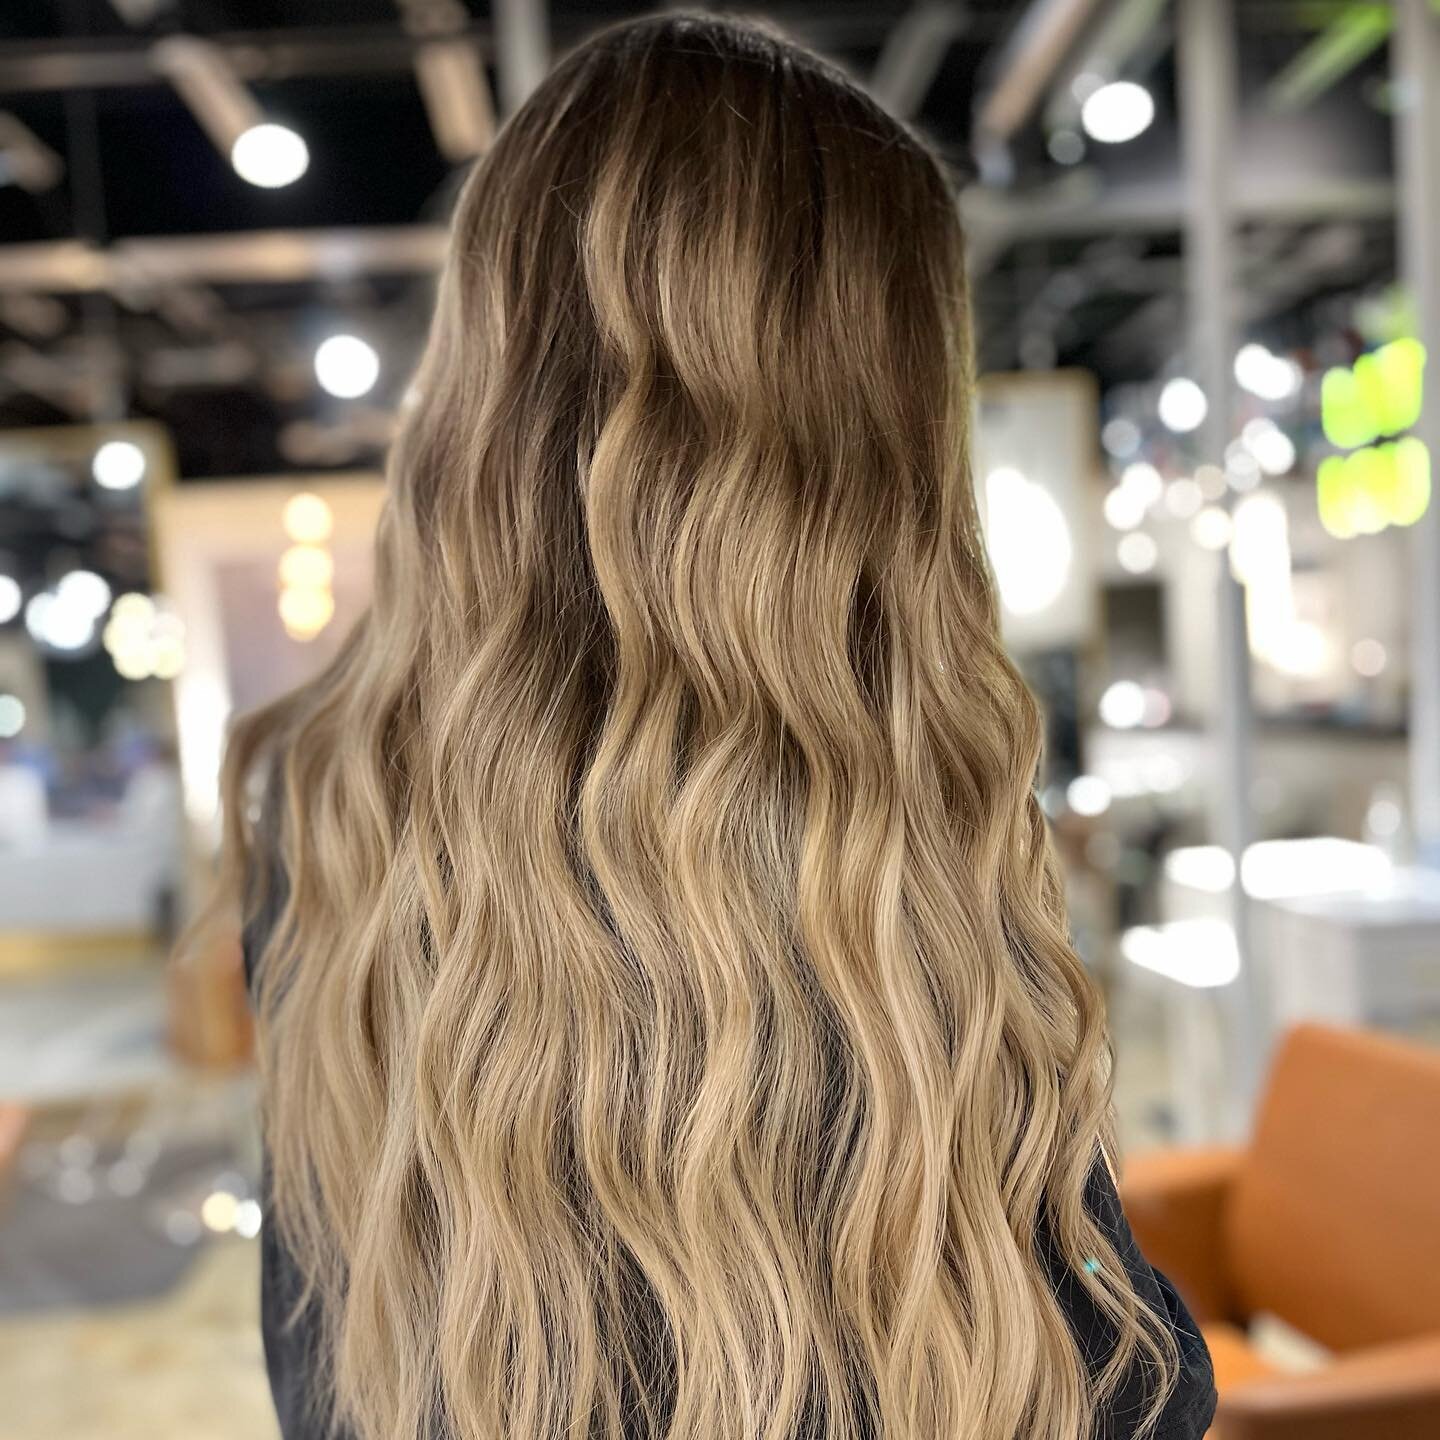 Hand painted balayage always wins 🤍
&bull;
&bull;
&bull;

#stlhairstylist #stlhair #stlhairsalon #stlstylist #stlextensions #stlblondingspecialist #stlreels #hairreels #haireducation #hairstylistreels #hairstylist #behindthechair #hairtips #hairtren